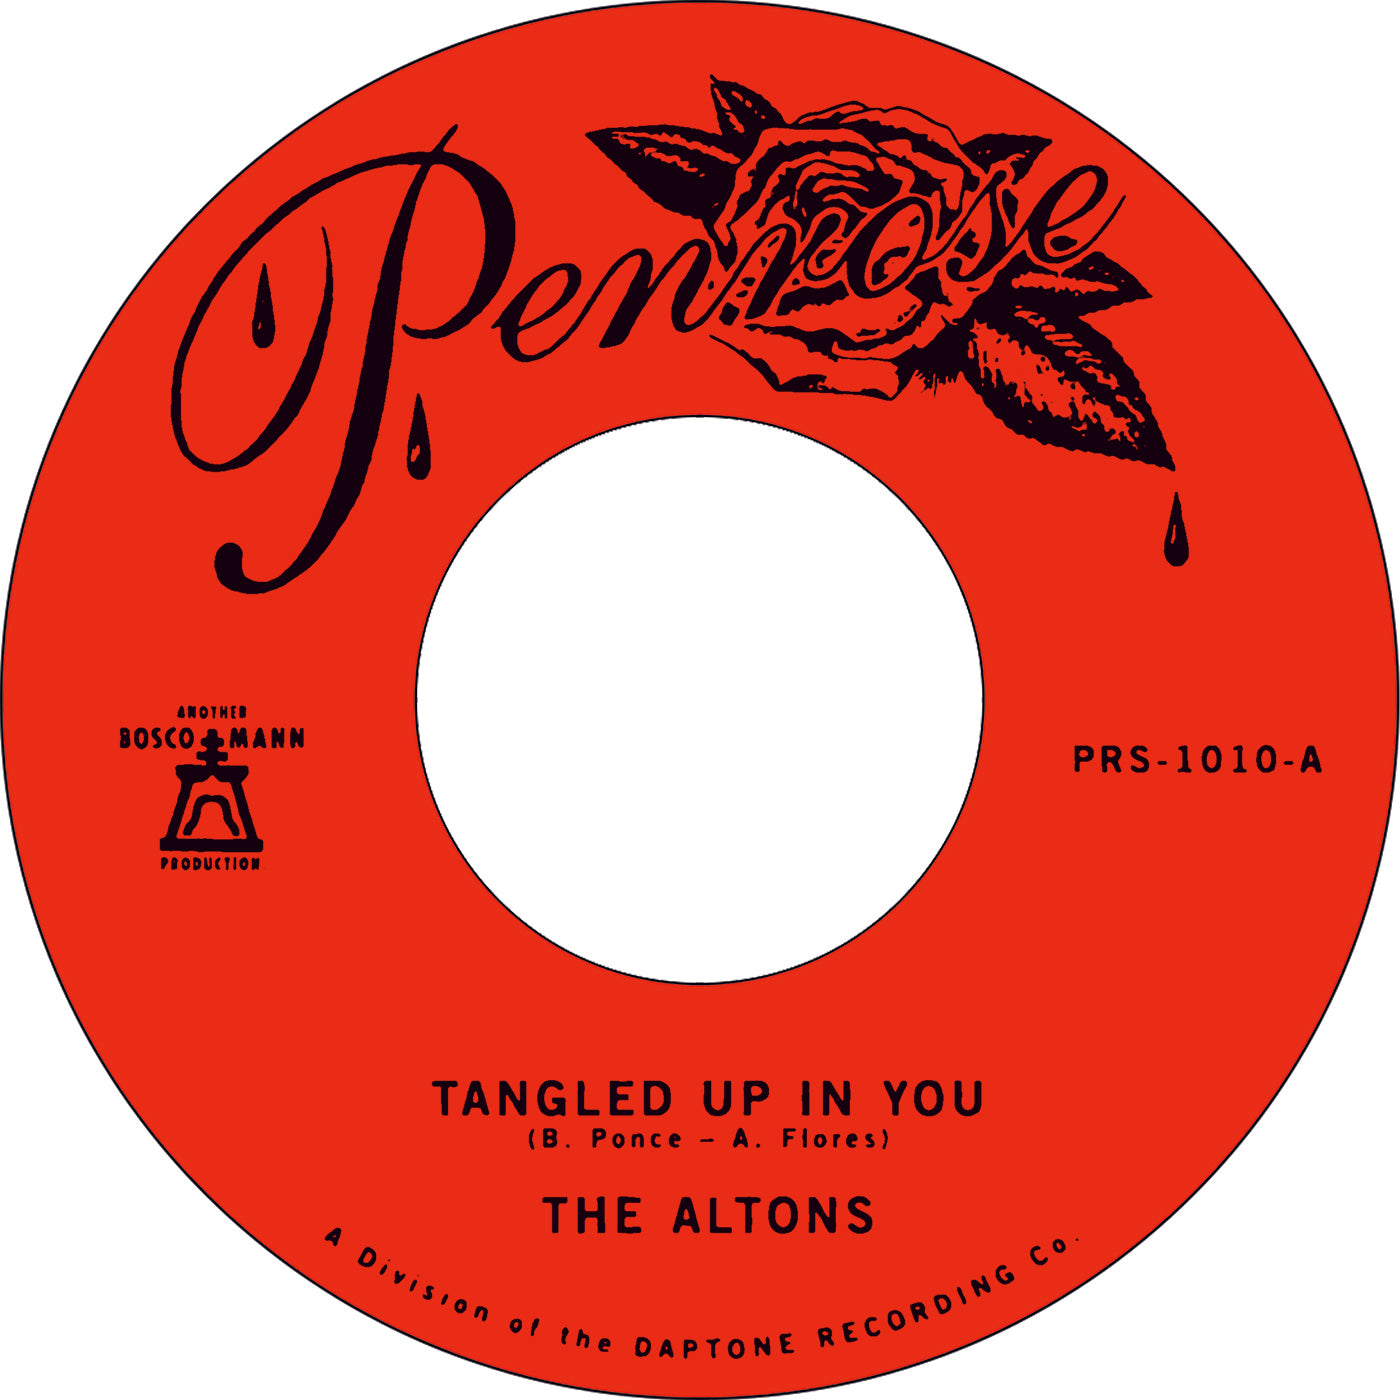 The Altons "Tangled Up In You" 45